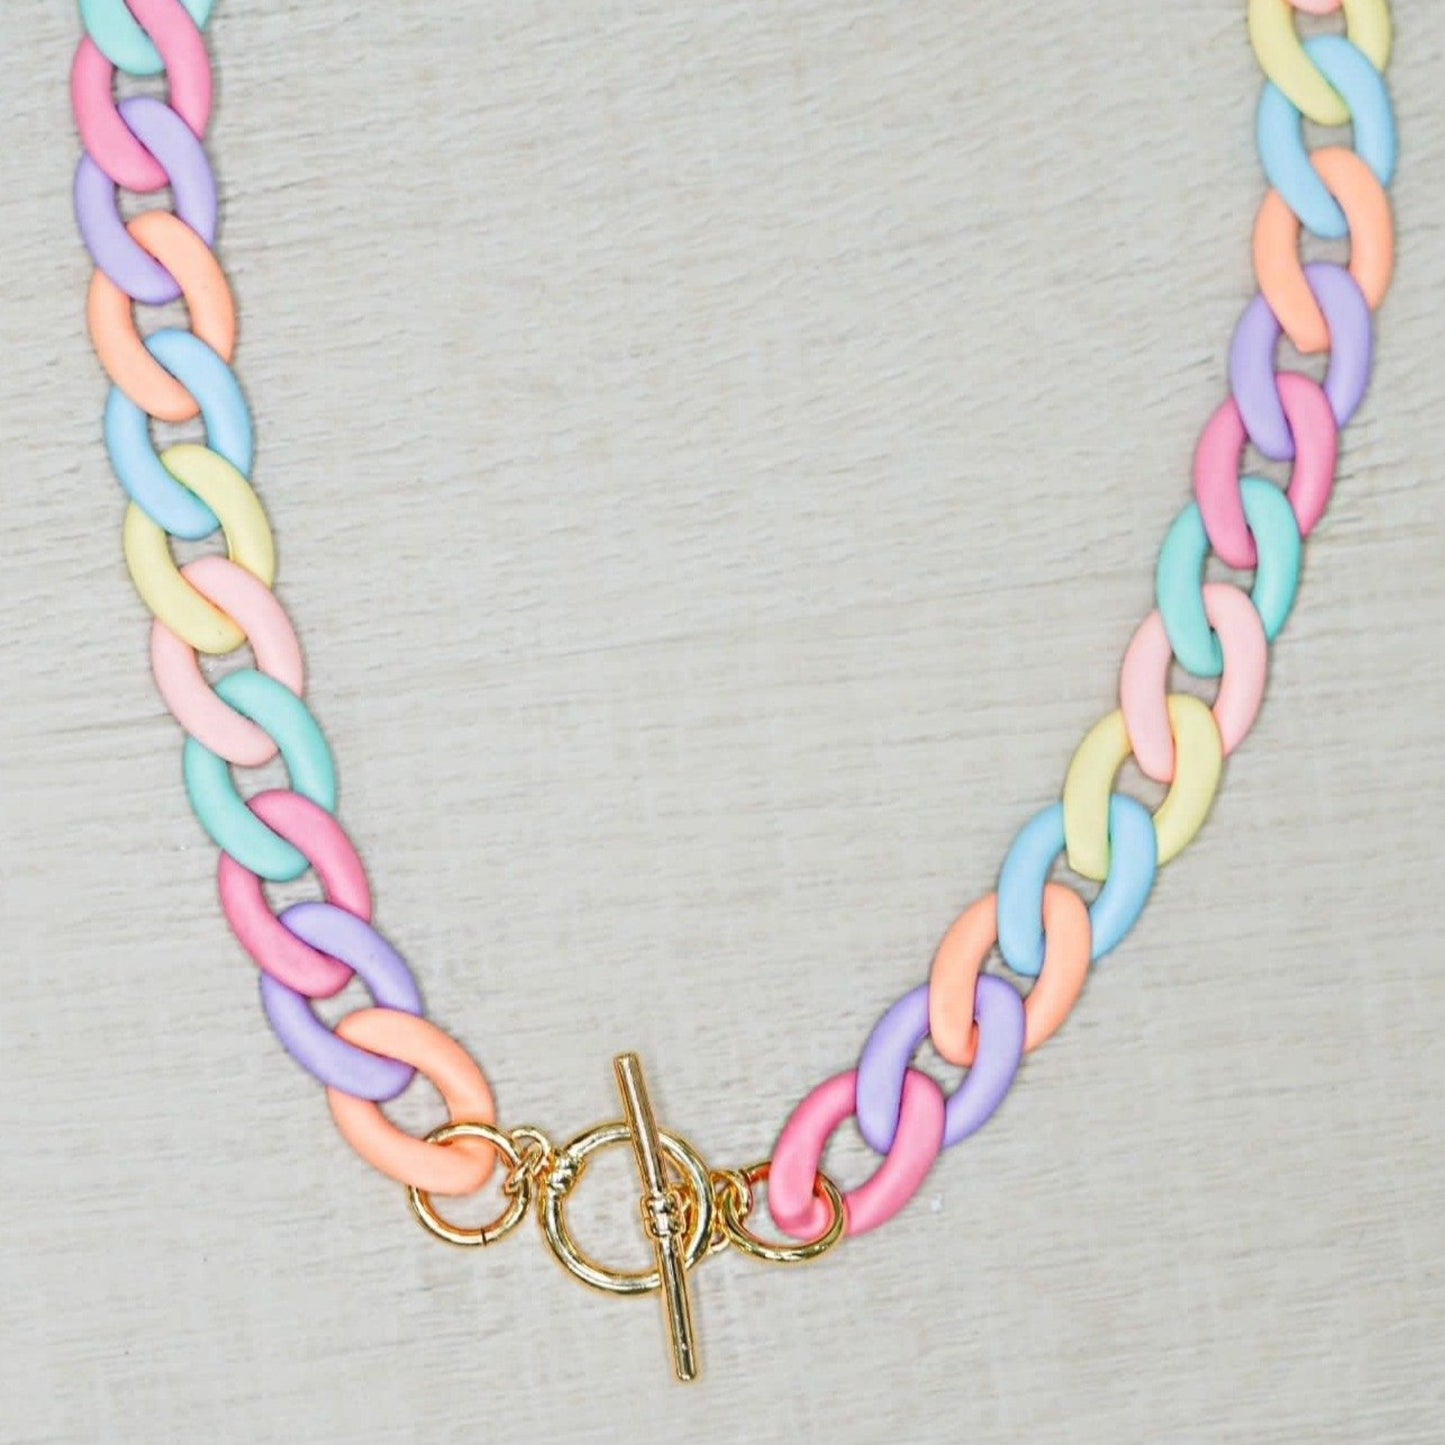 Multicolor spring choker handmade in acrylic in pastel color with gold-plated accessory by ISVI boutique Miami